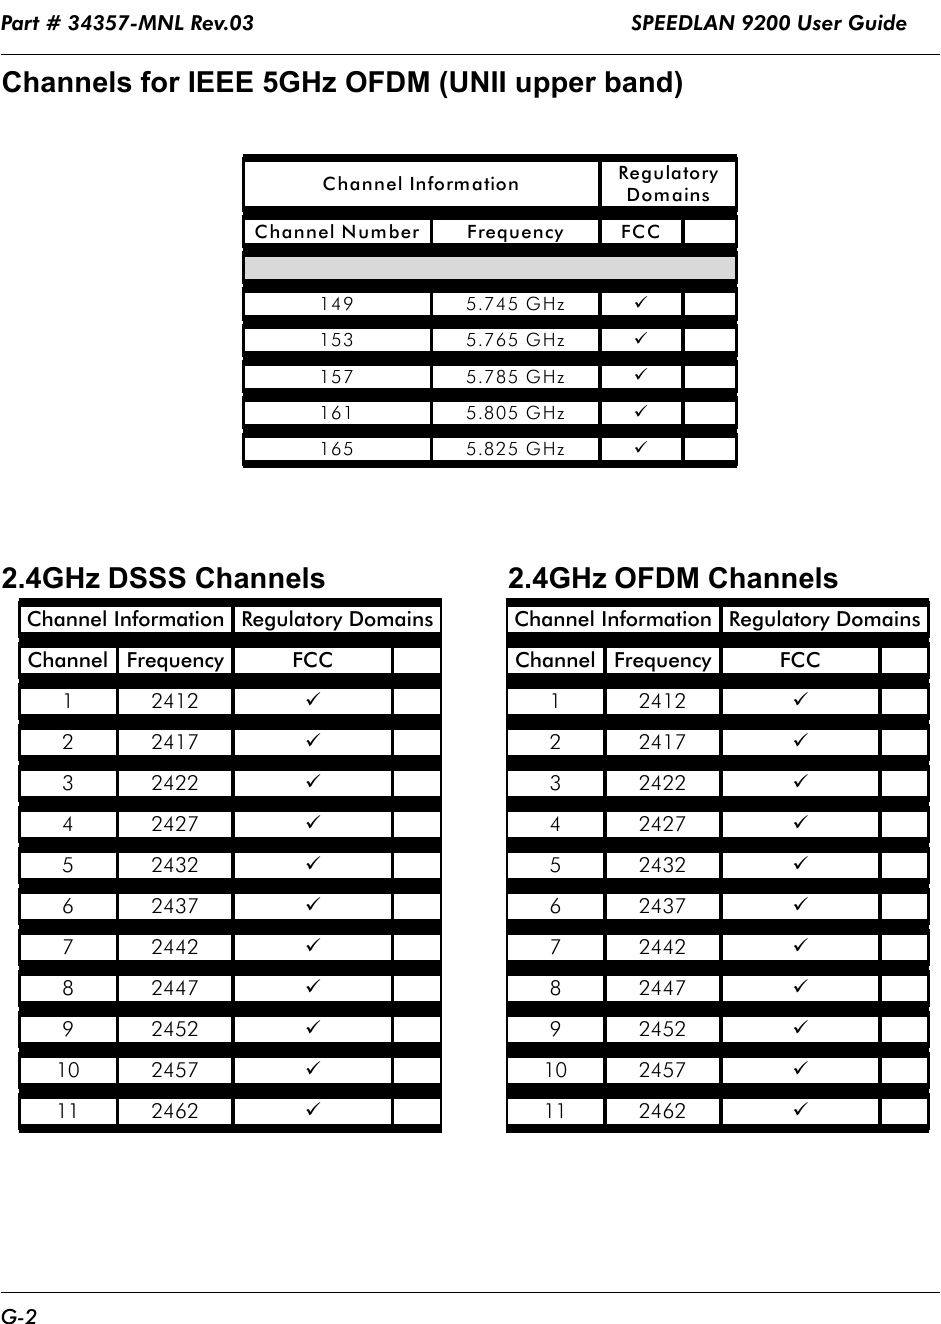 Part # 34357-MNL Rev.03                                                             SPEEDLAN 9200 User Guide G-2Channels for IEEE 5GHz OFDM (UNII upper band)2.4GHz DSSS Channels                        2.4GHz OFDM Channels Channel Information  Regulatory Domains Channel Number Frequency   FCC       149  5.745 GHz  9  153  5.765 GHz  9  157  5.785 GHz  9  161  5.805 GHz  9  165  5.825 GHz  9  Channel Information  Regulatory DomainsChannel  Frequency  FCC   1   2412   9  2   2417   9  3   2422   9  4   2427   9  5   2432   9  6   2437   9  7   2442   9  8   2447   9  9   2452   9  10   2457   9  11   2462   9   Channel Information  Regulatory DomainsChannel Frequency  FCC   1   2412   9  2   2417   9  3   2422   9  4   2427   9  5   2432   9  6   2437   9  7   2442   9  8   2447   9  9   2452   9  10   2457   9  11   2462   9                